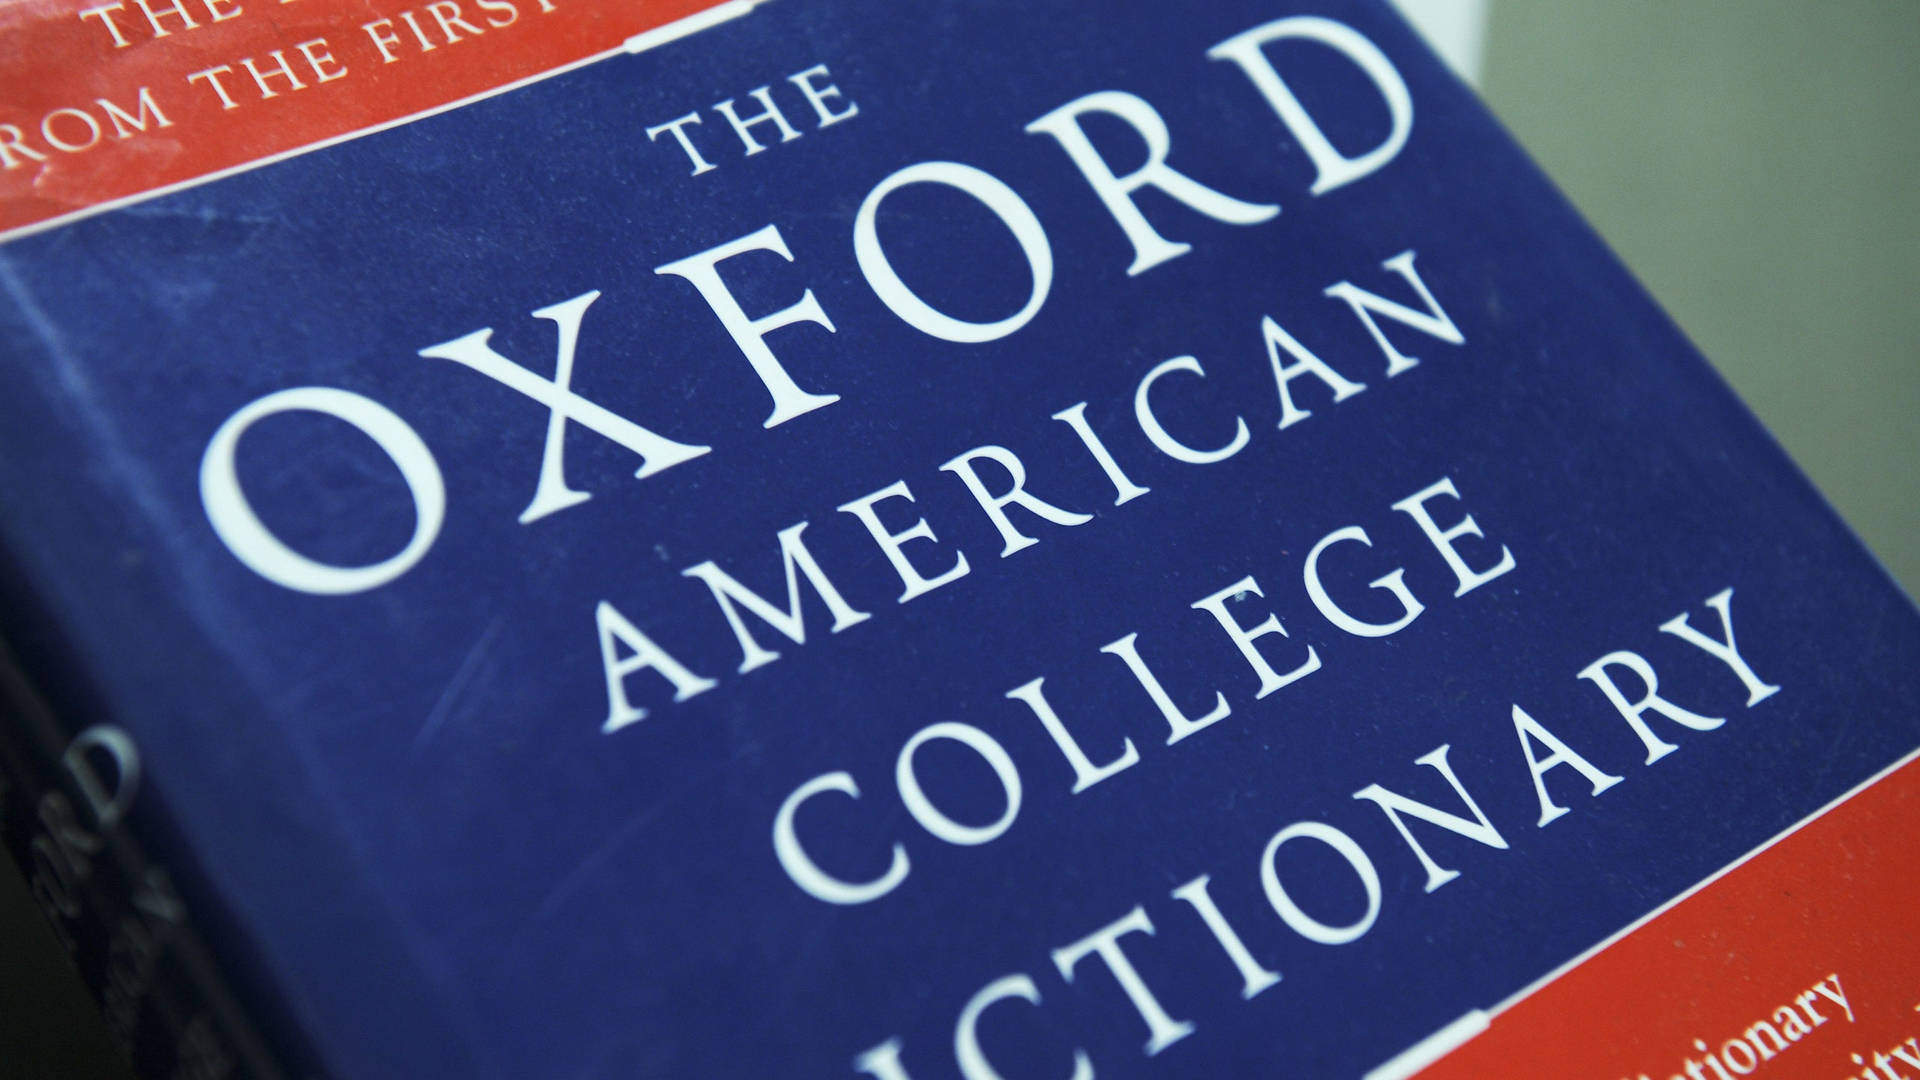 Oxford American College Dictionary Wallpaper